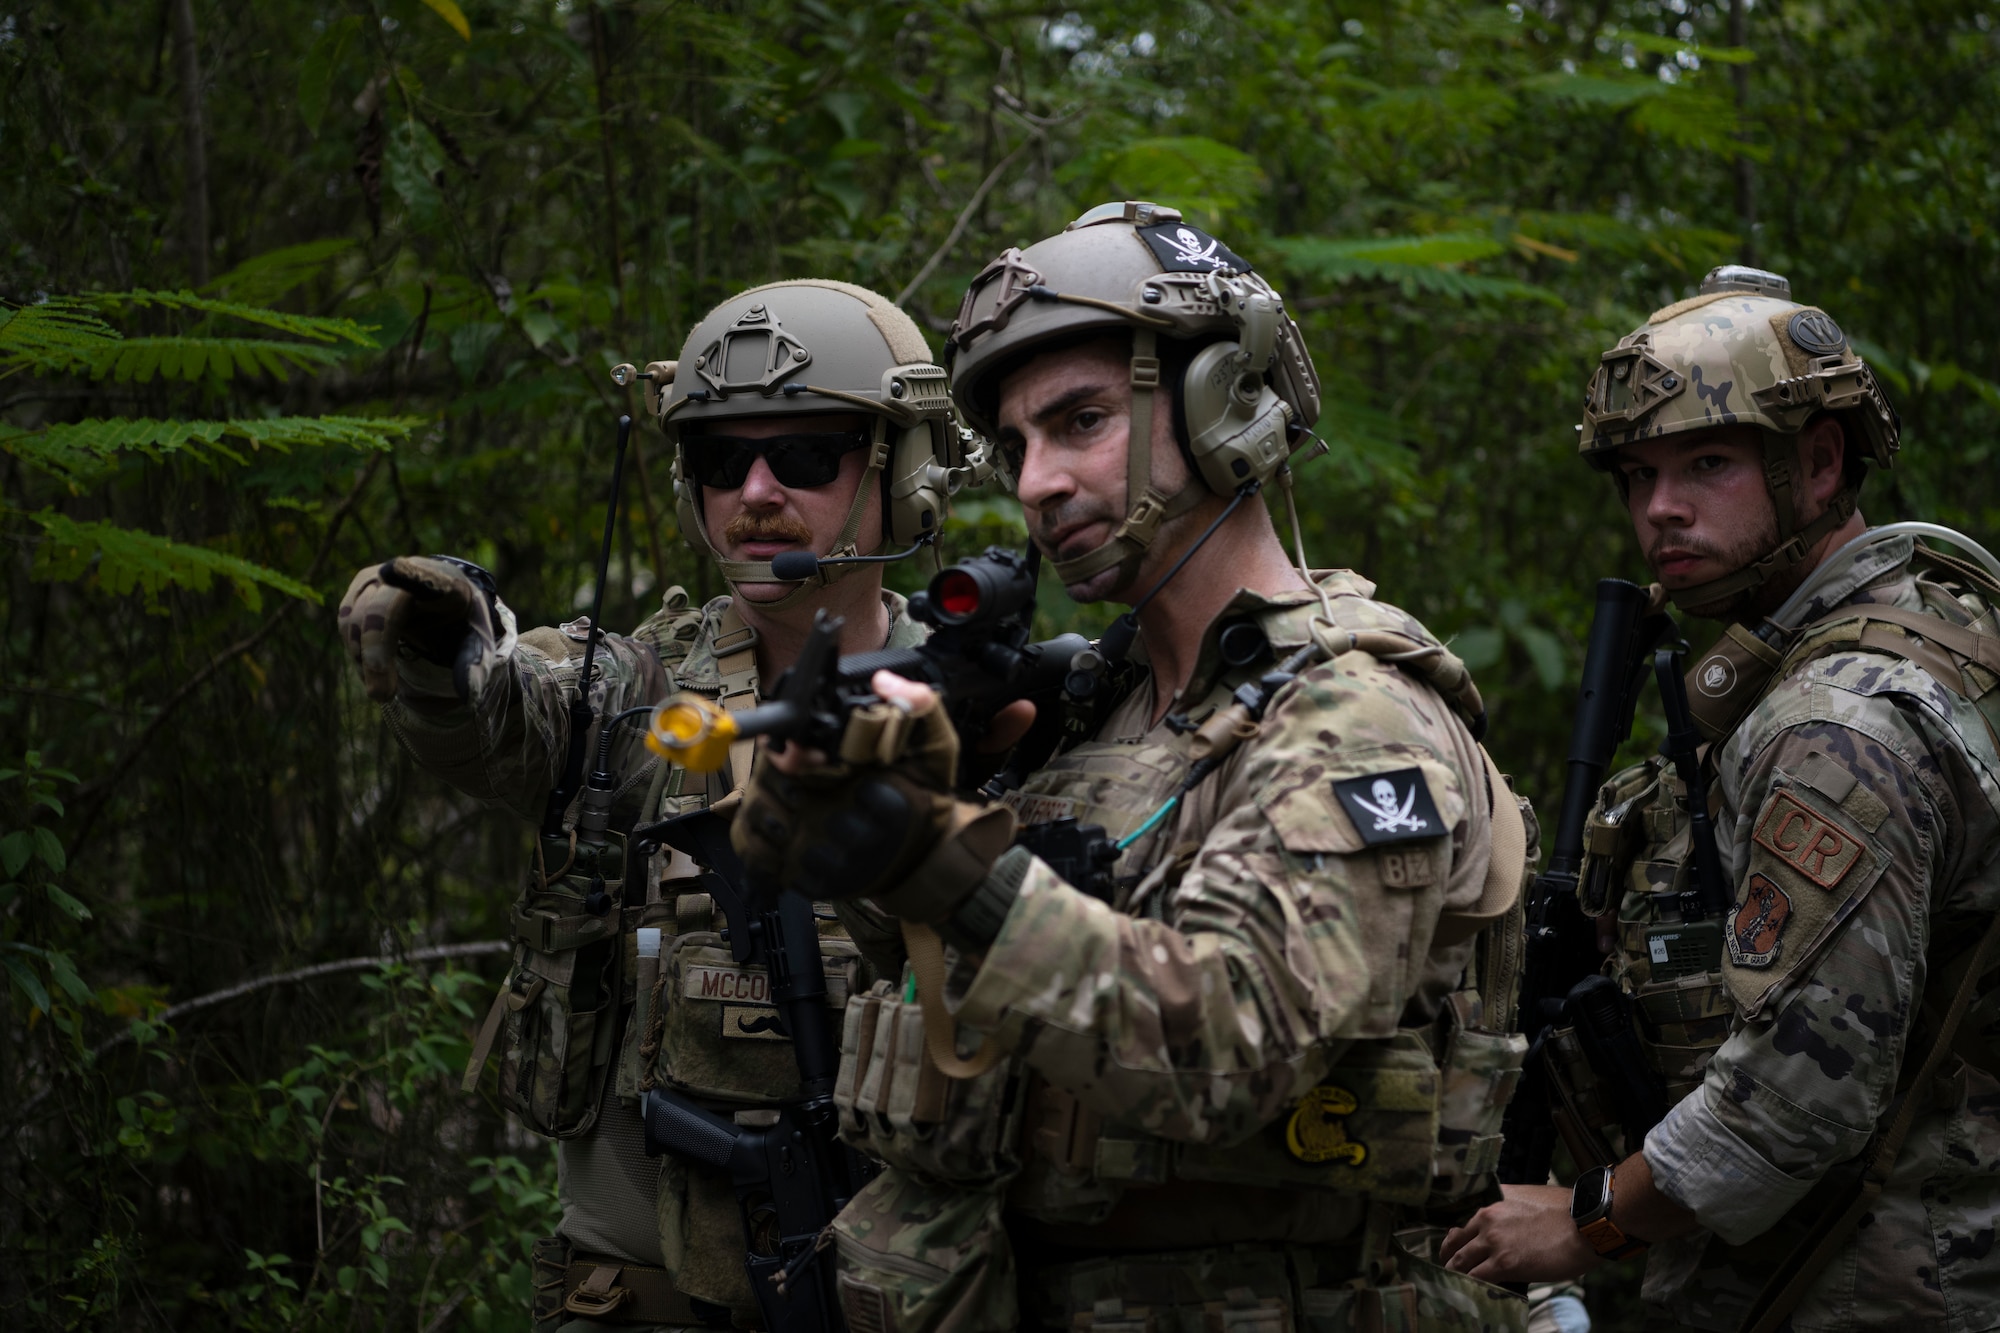 From left, U.S. Air Force Master Sgt. Joshua McConnel, a security forces craftsman, and Staff Sgt. Yuri Motamedi, a security forces craftsman, both with the 123rd Contingency Response Group, Kentucky Air National Guard, and Senior Airman Kevin Medina, a security forces journeyman with the 156th Security Operations Squadron, Puerto Rico Air National Guard, communicate during air base ground defense training at Muñiz Air National Guard Base in Carolina, Puerto Rico, Sept. 21, 2023. During the training, Airmen reinforced air base ground defense skills utilized during contingency response operations in contested environments by practicing radio communications, warning and operation orders, vehicle searches, vehicle take-downs, close-quarter battle, and small team tactics. (U.S. Air National Guard photo by Master Sgt. Rafael D. Rosa)